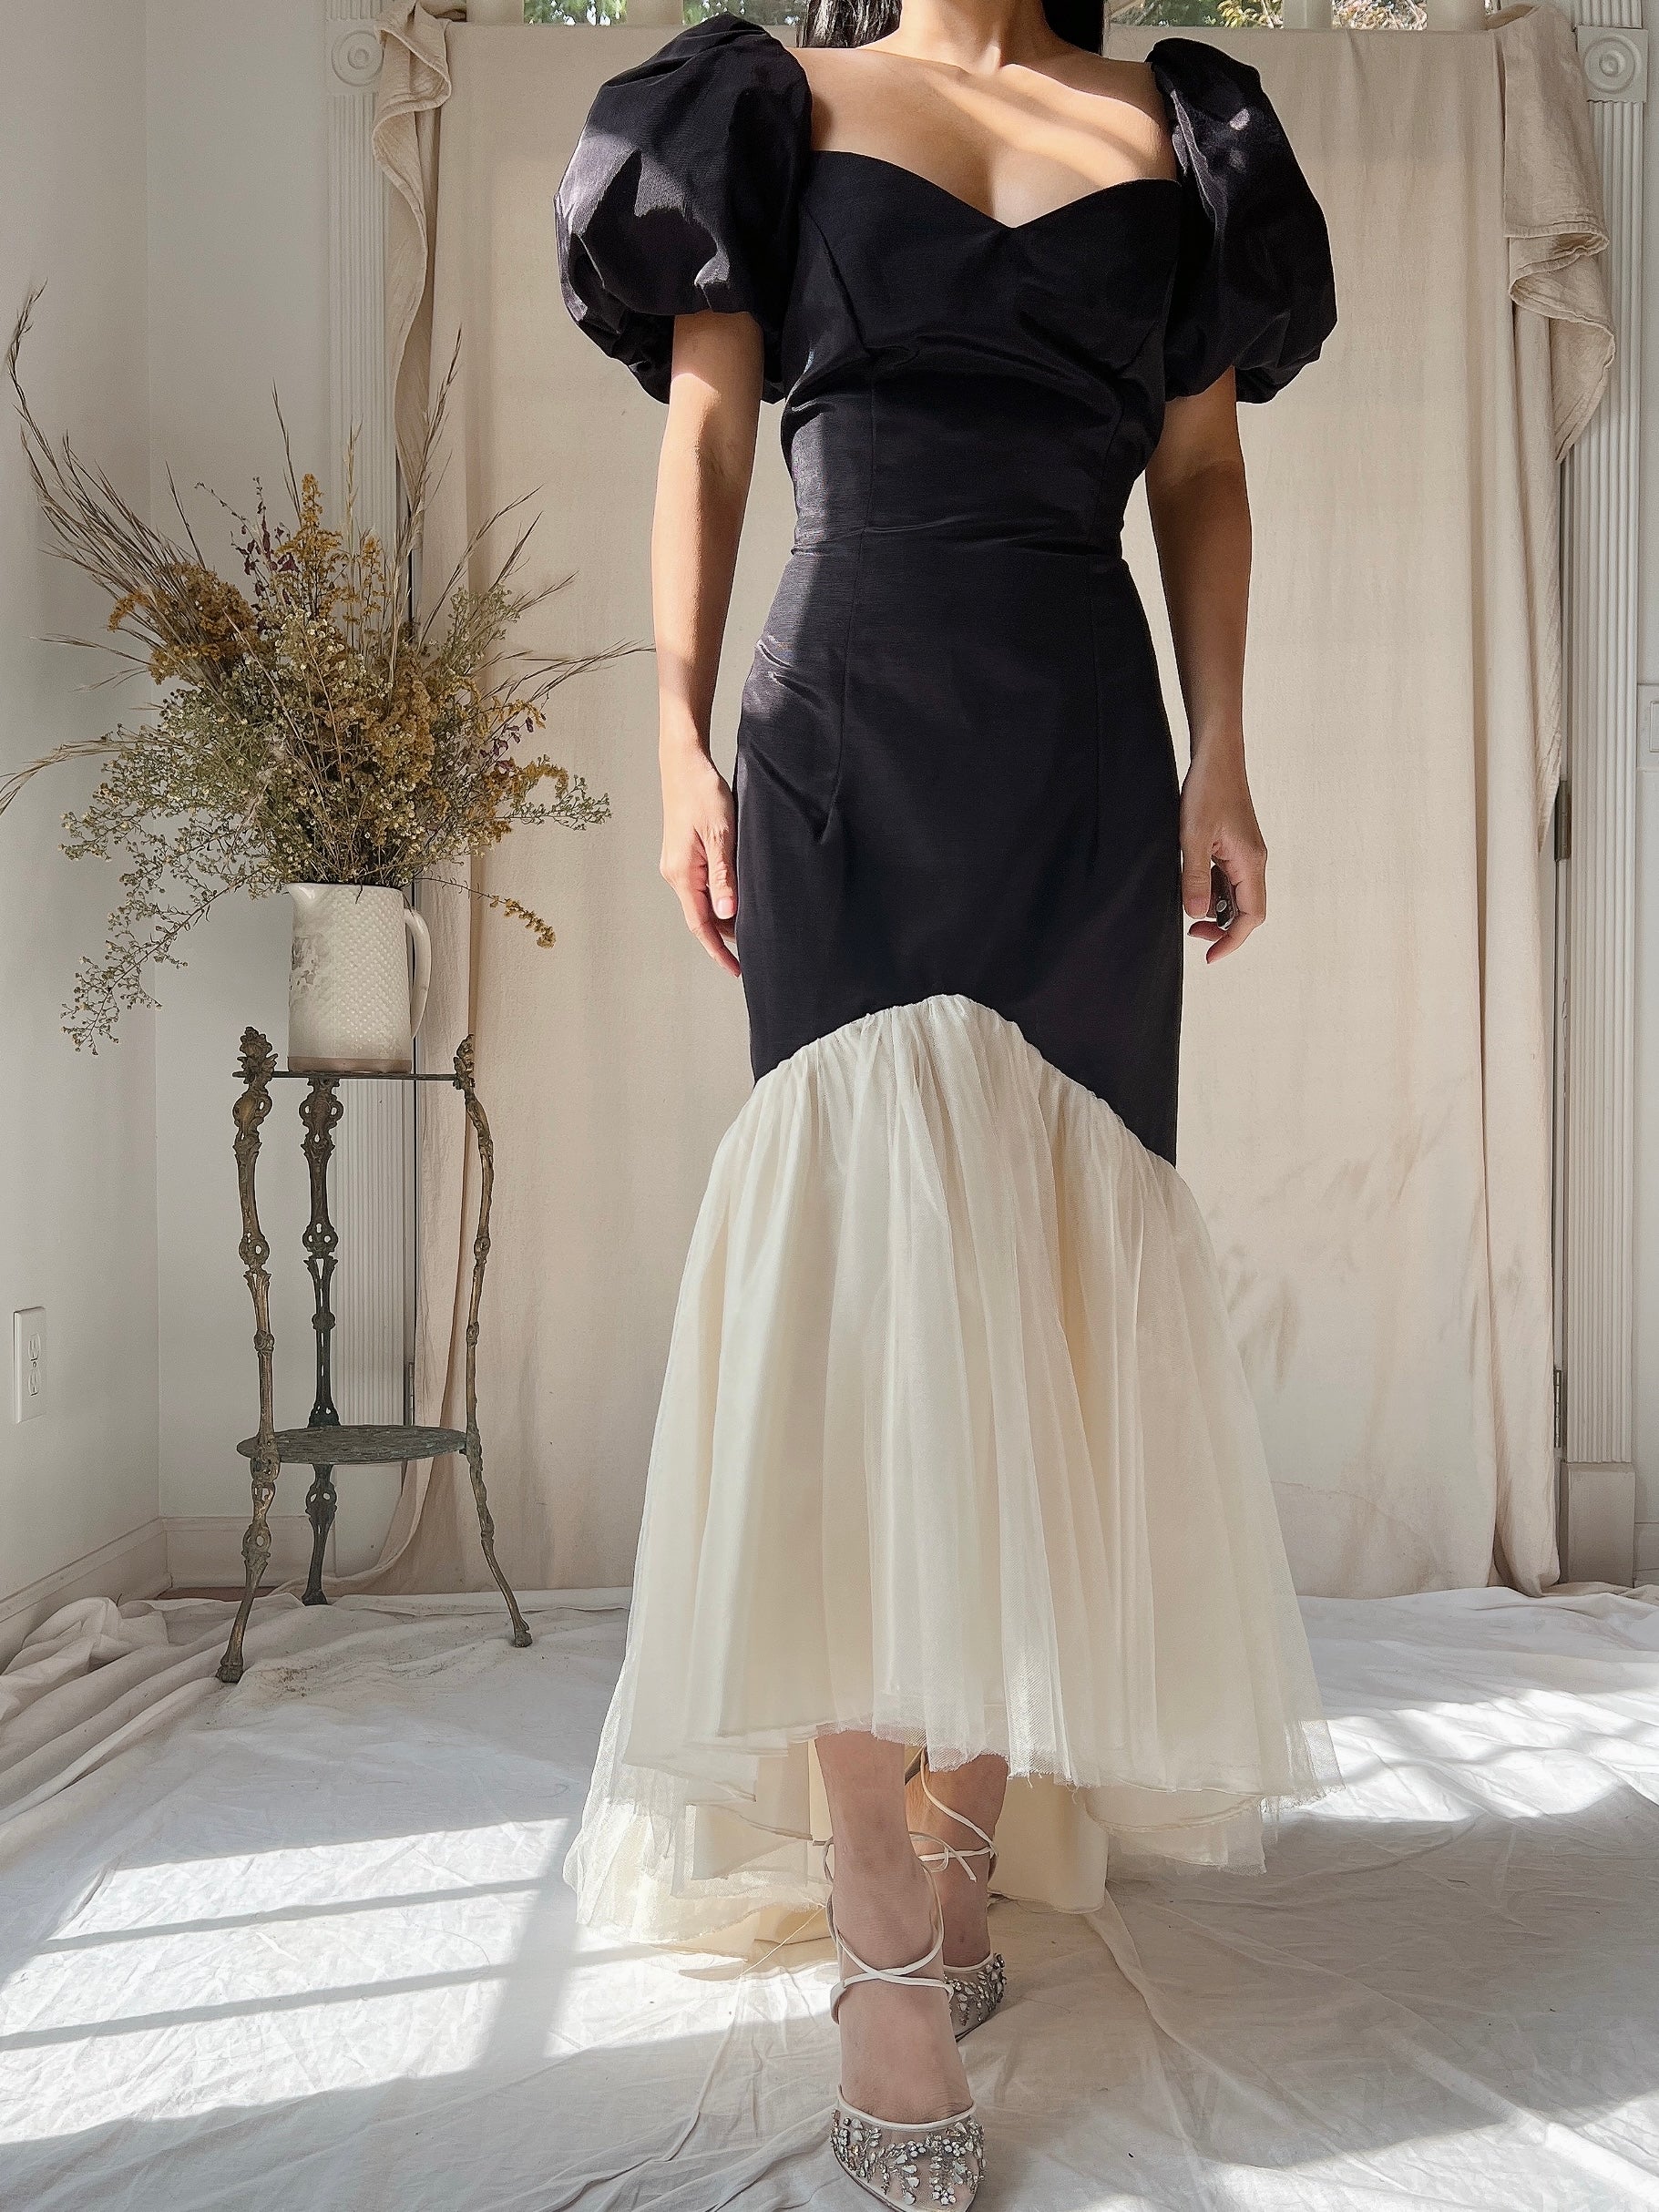 Vintage Grossgrain and Tulle Dress - M